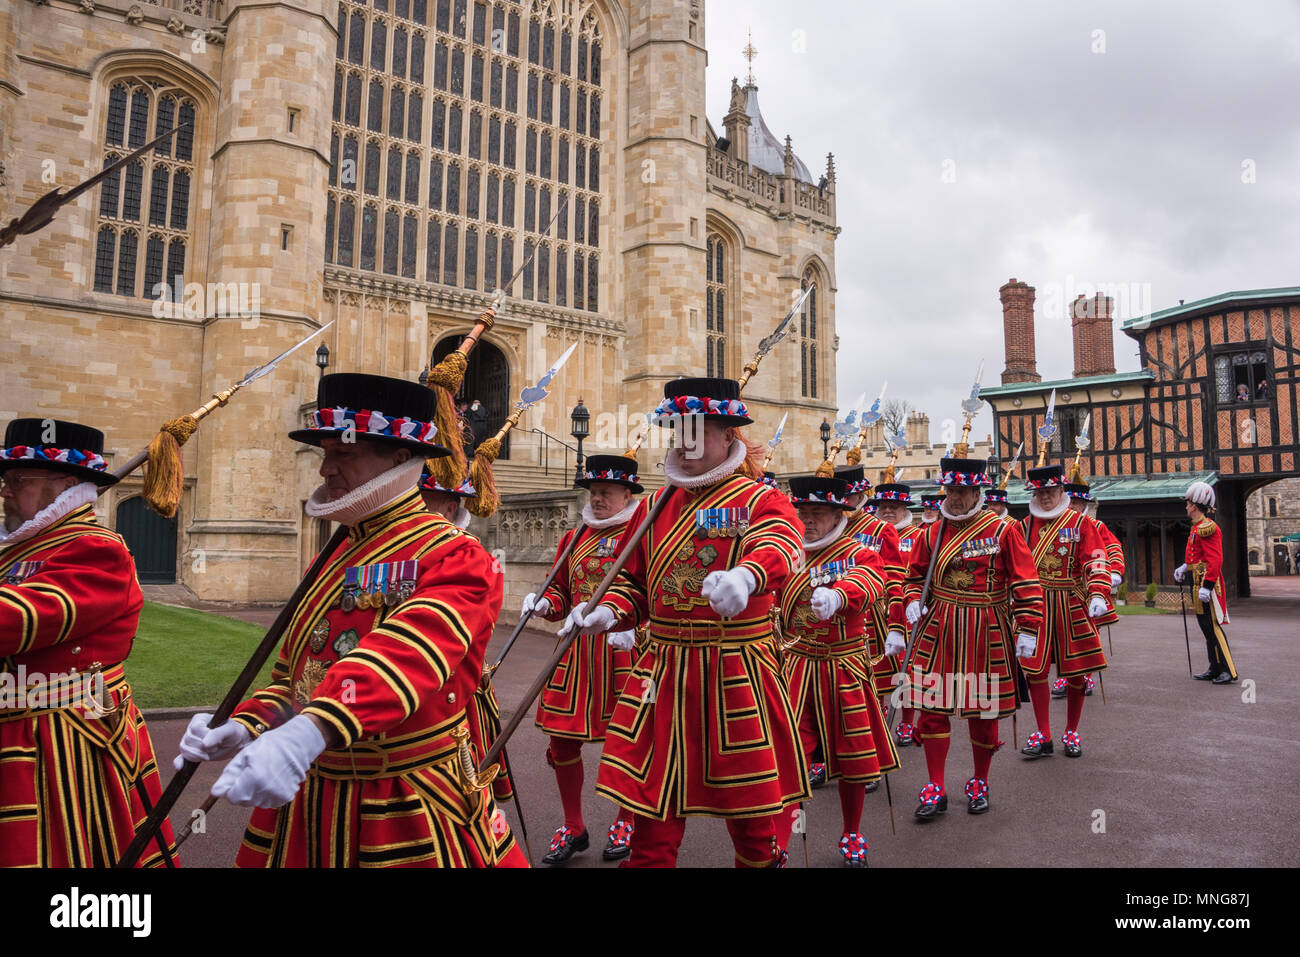 The Yeomen of the Guard march away after a photocall with the Queen at St George's Chapel, Windsor after the distribution of the Maundy Money. Stock Photo